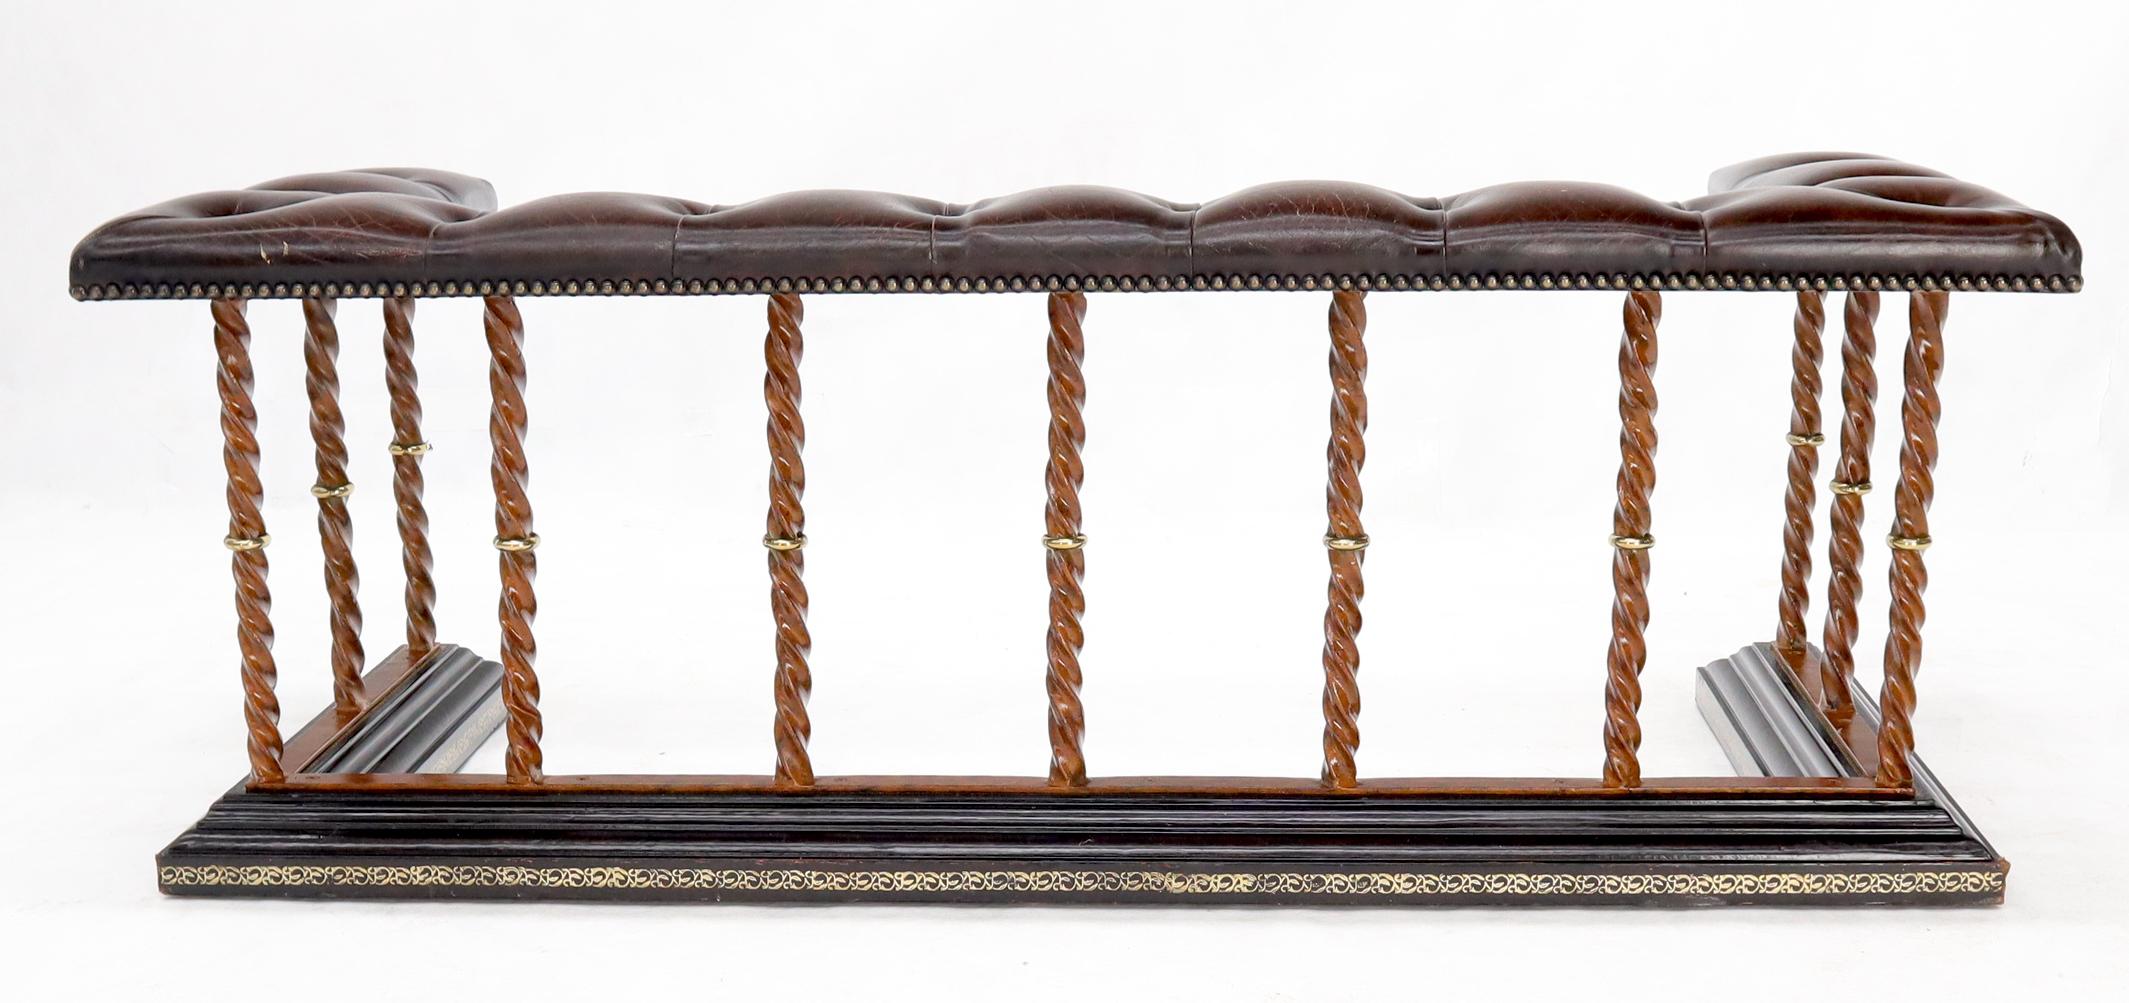 American Tufted Leather Upholstery Wrought Iron Base Fireplace Bench